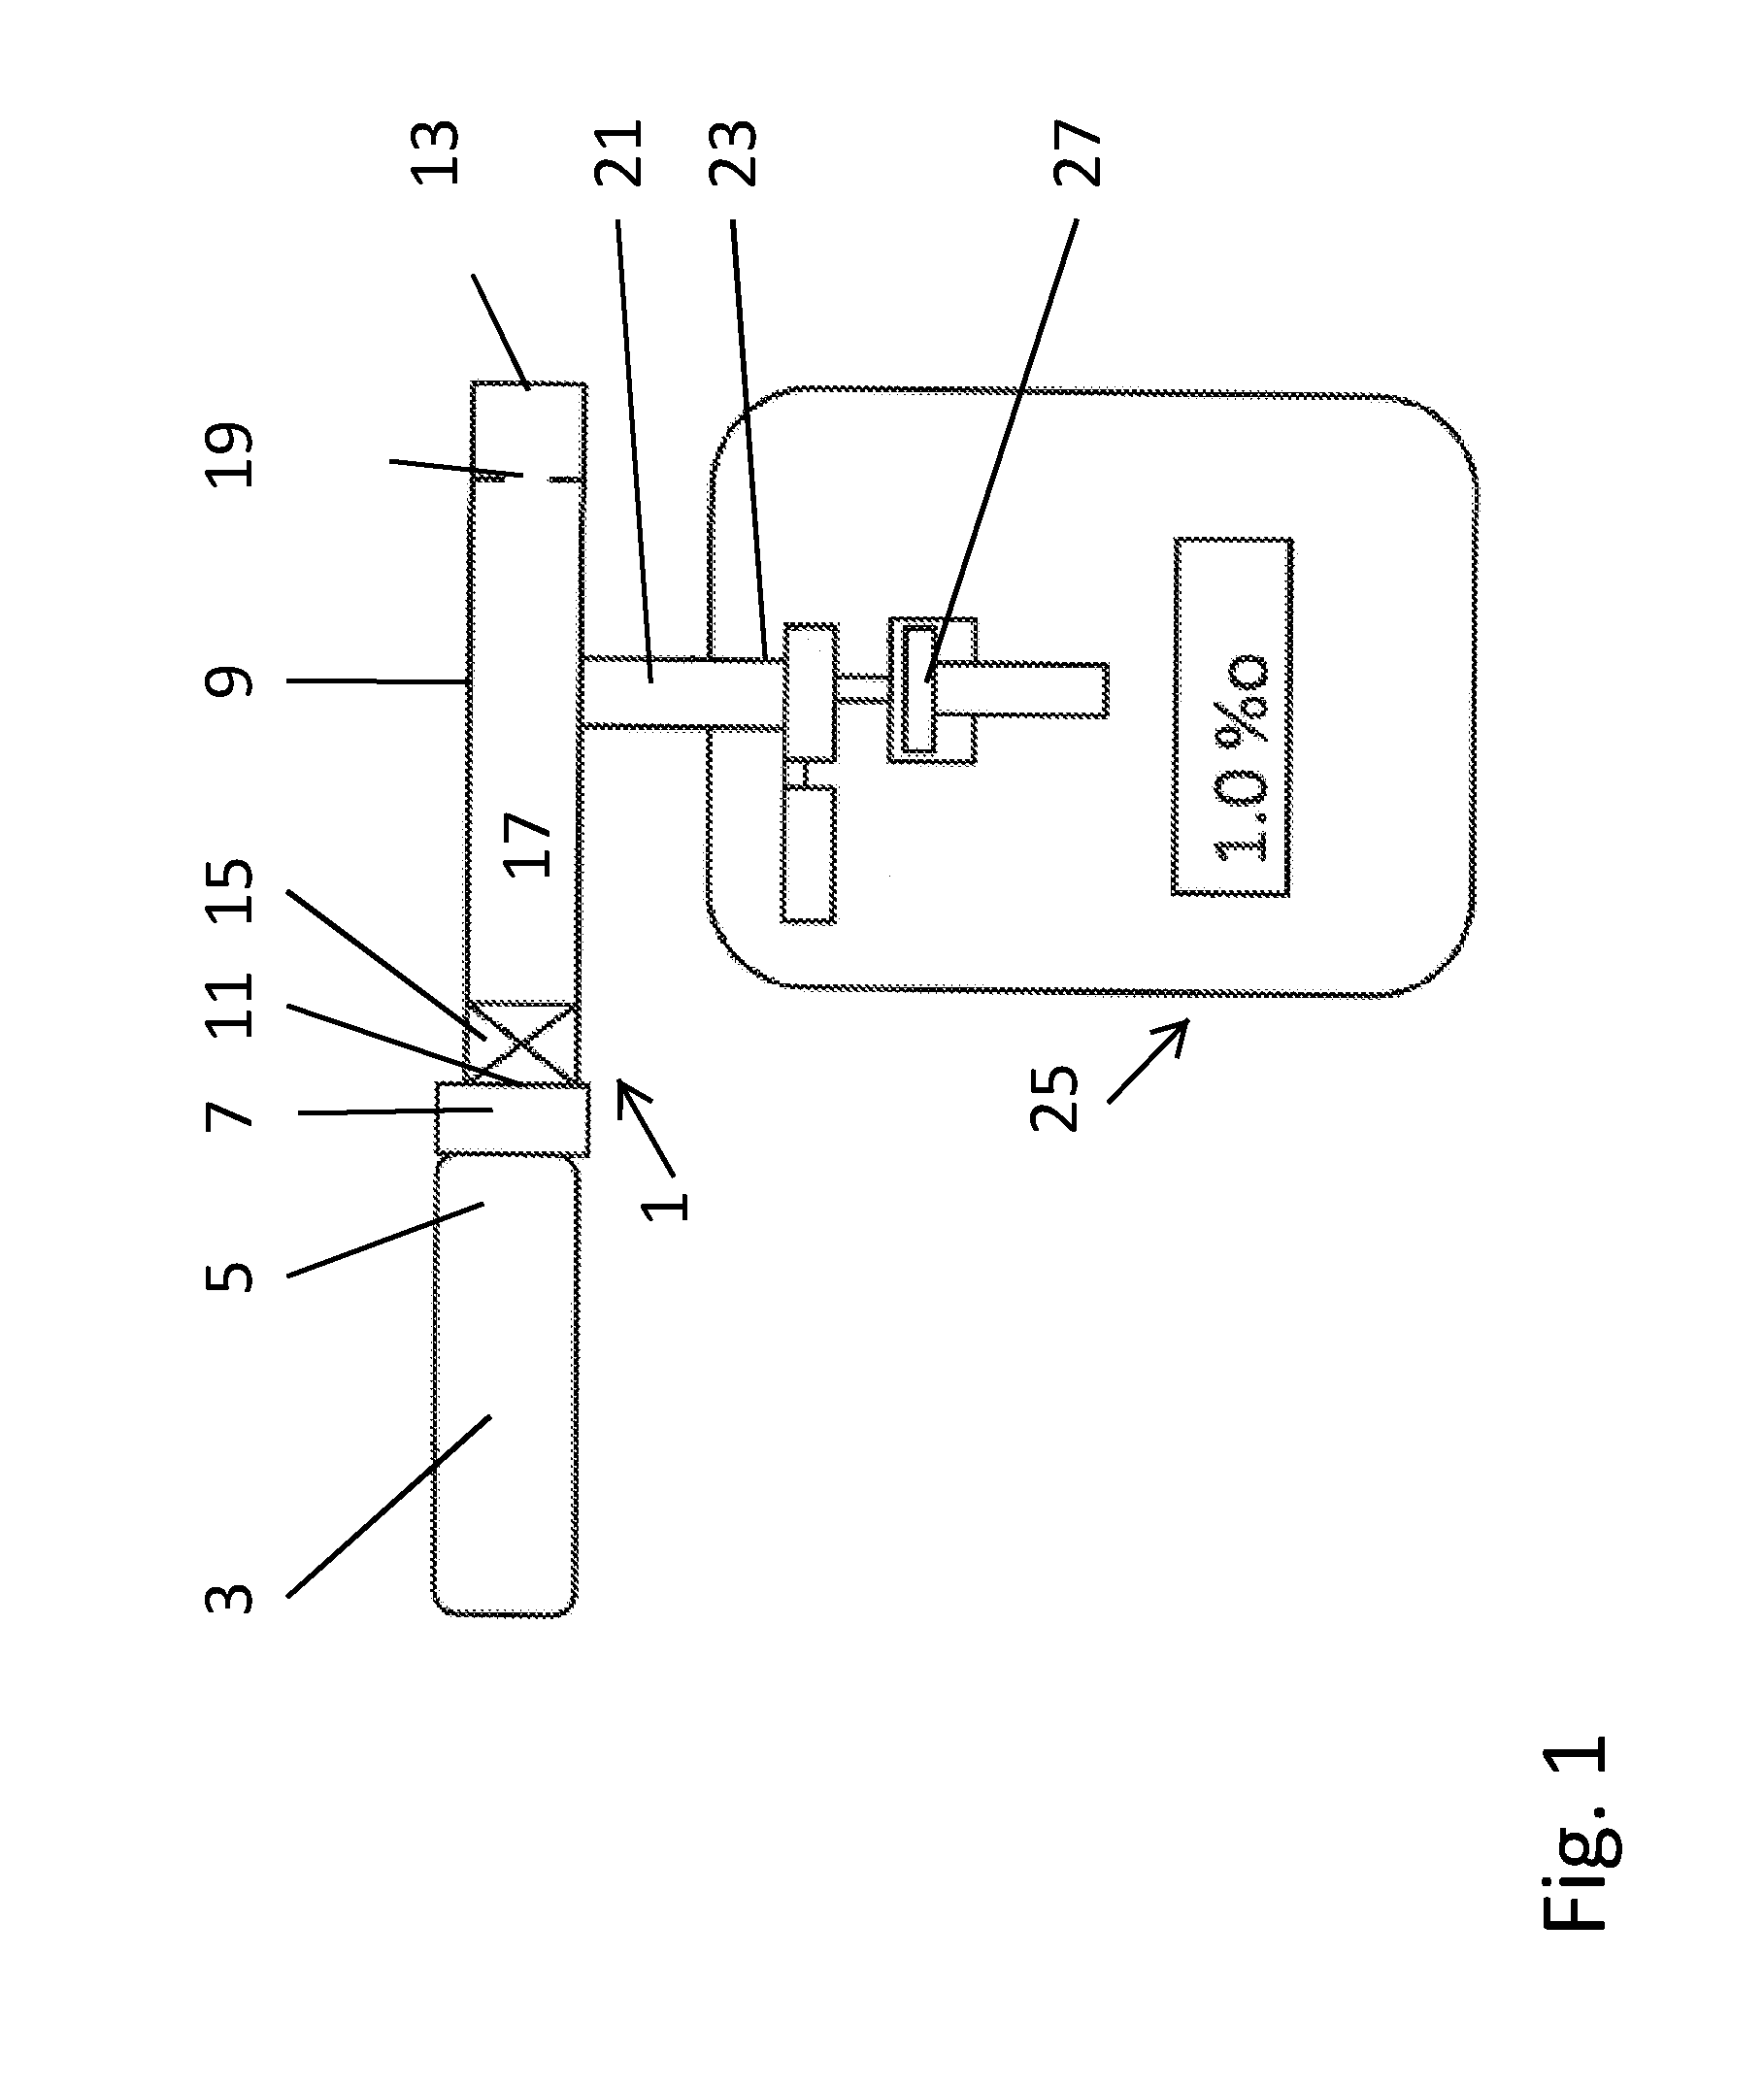 Calibrating device for breath alcohol measuring devices